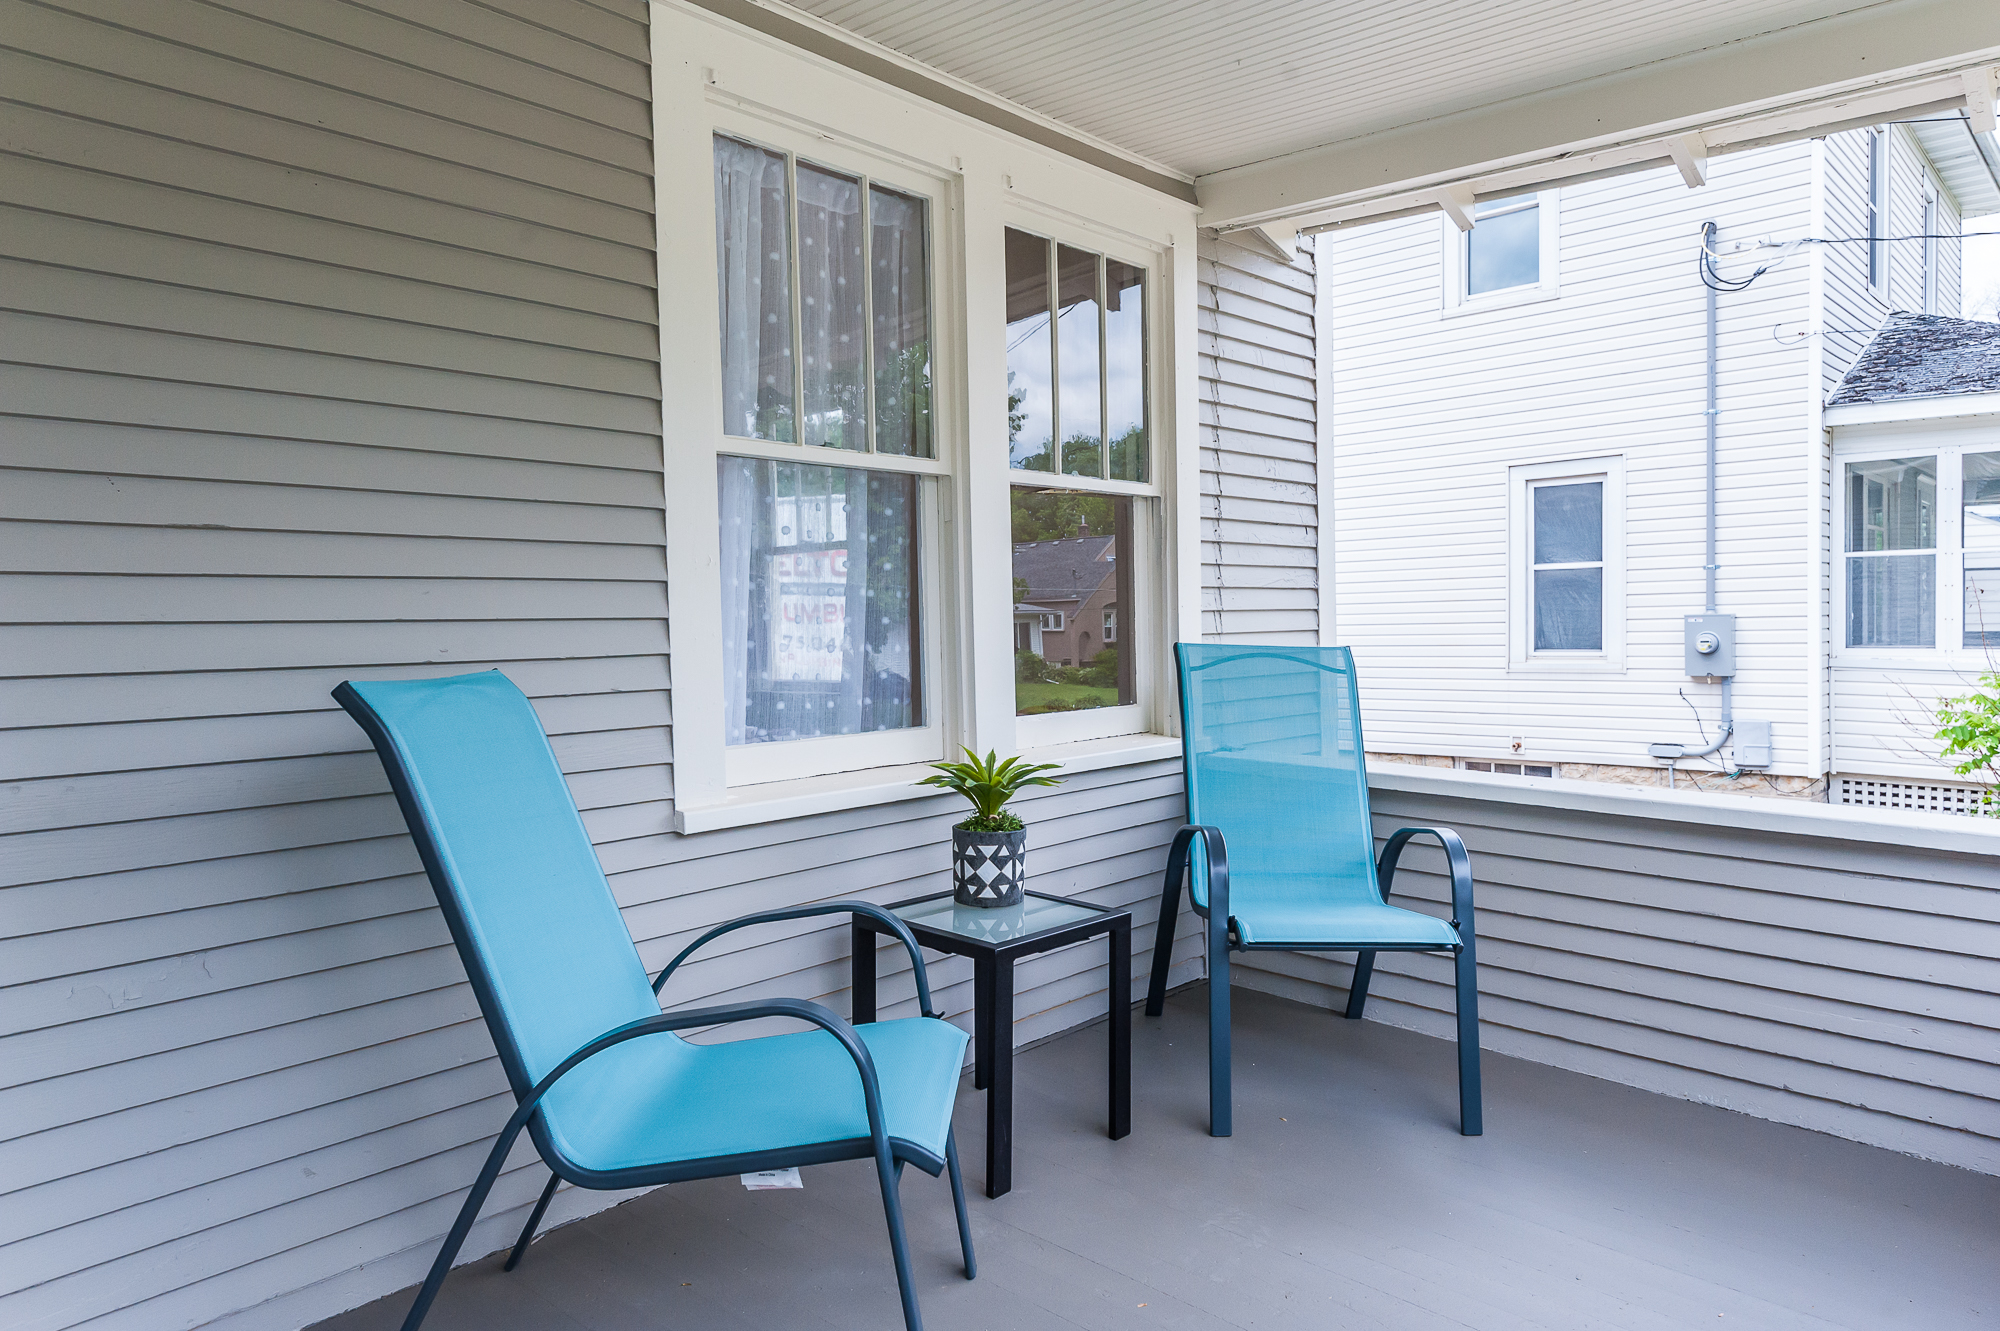 Great front porch for relaxing and sipping morning coffee